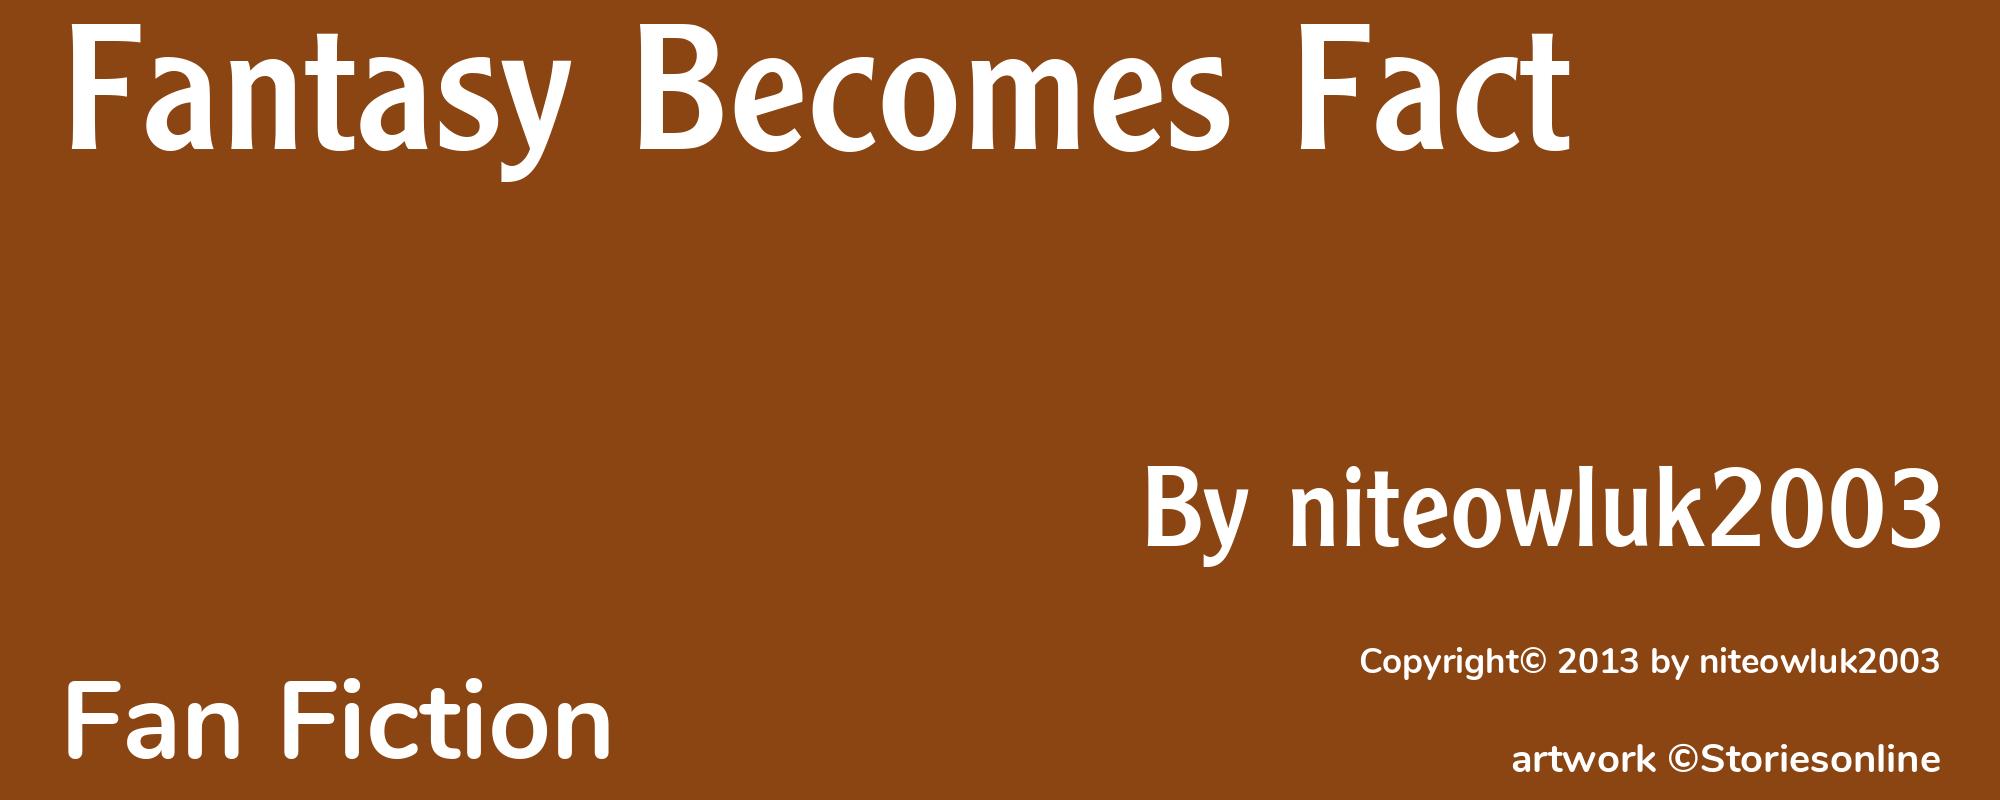 Fantasy Becomes Fact - Cover